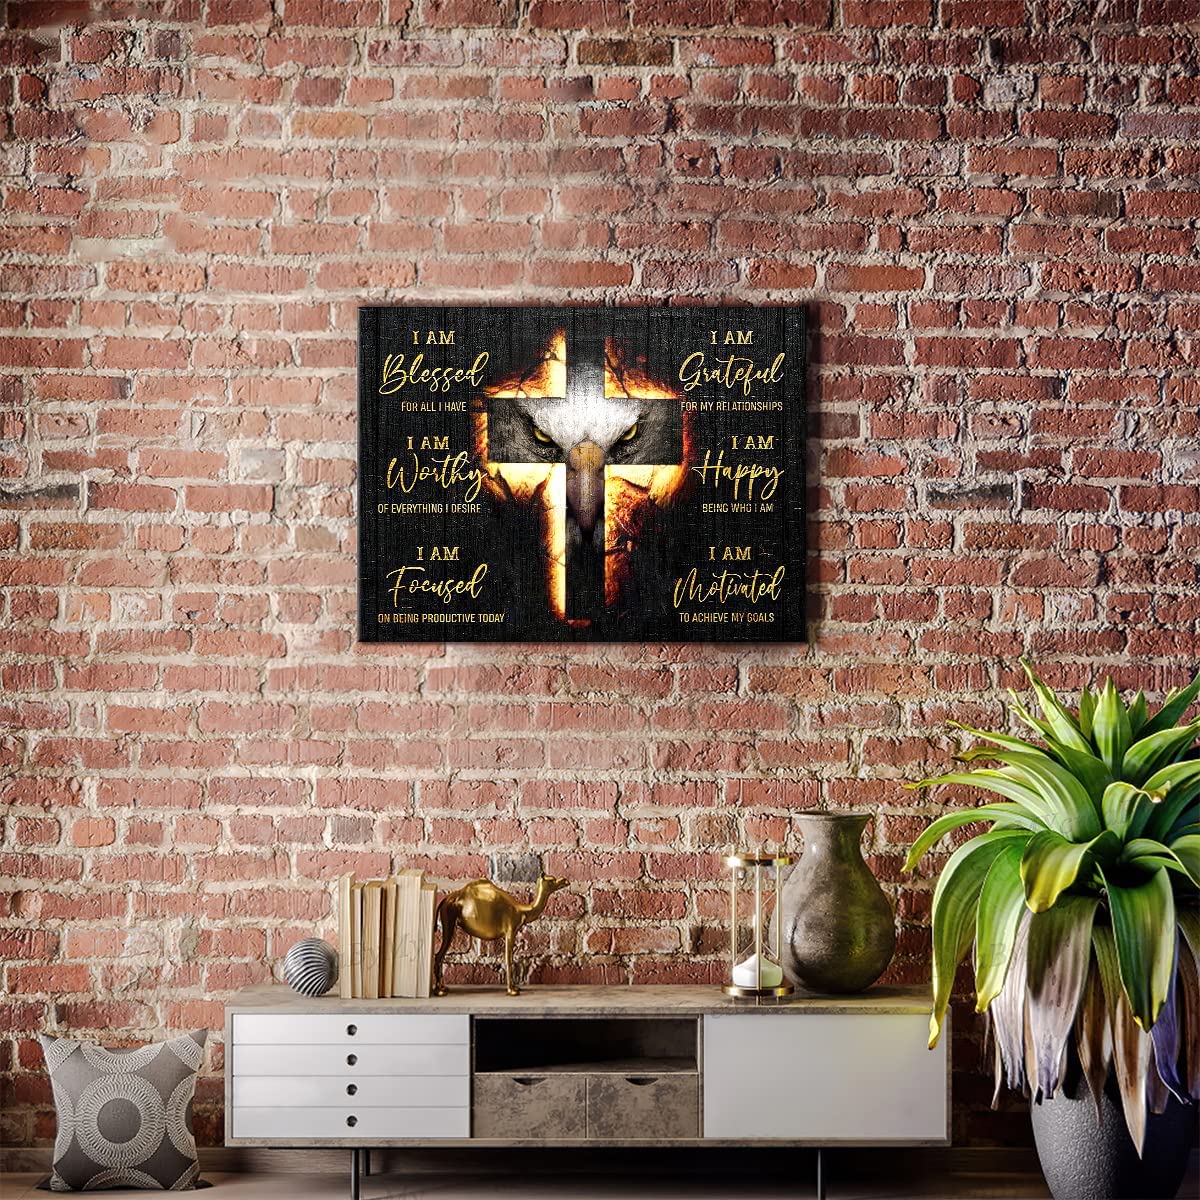 Christian Bald Eagle Canvas Wall Art Scripture Religious Pictures Wall Decor  Bald Eagle Gifts Motivational Quotes Painting for Office Bedroom Bathroom  Living Room Prints Artwork Framed 12